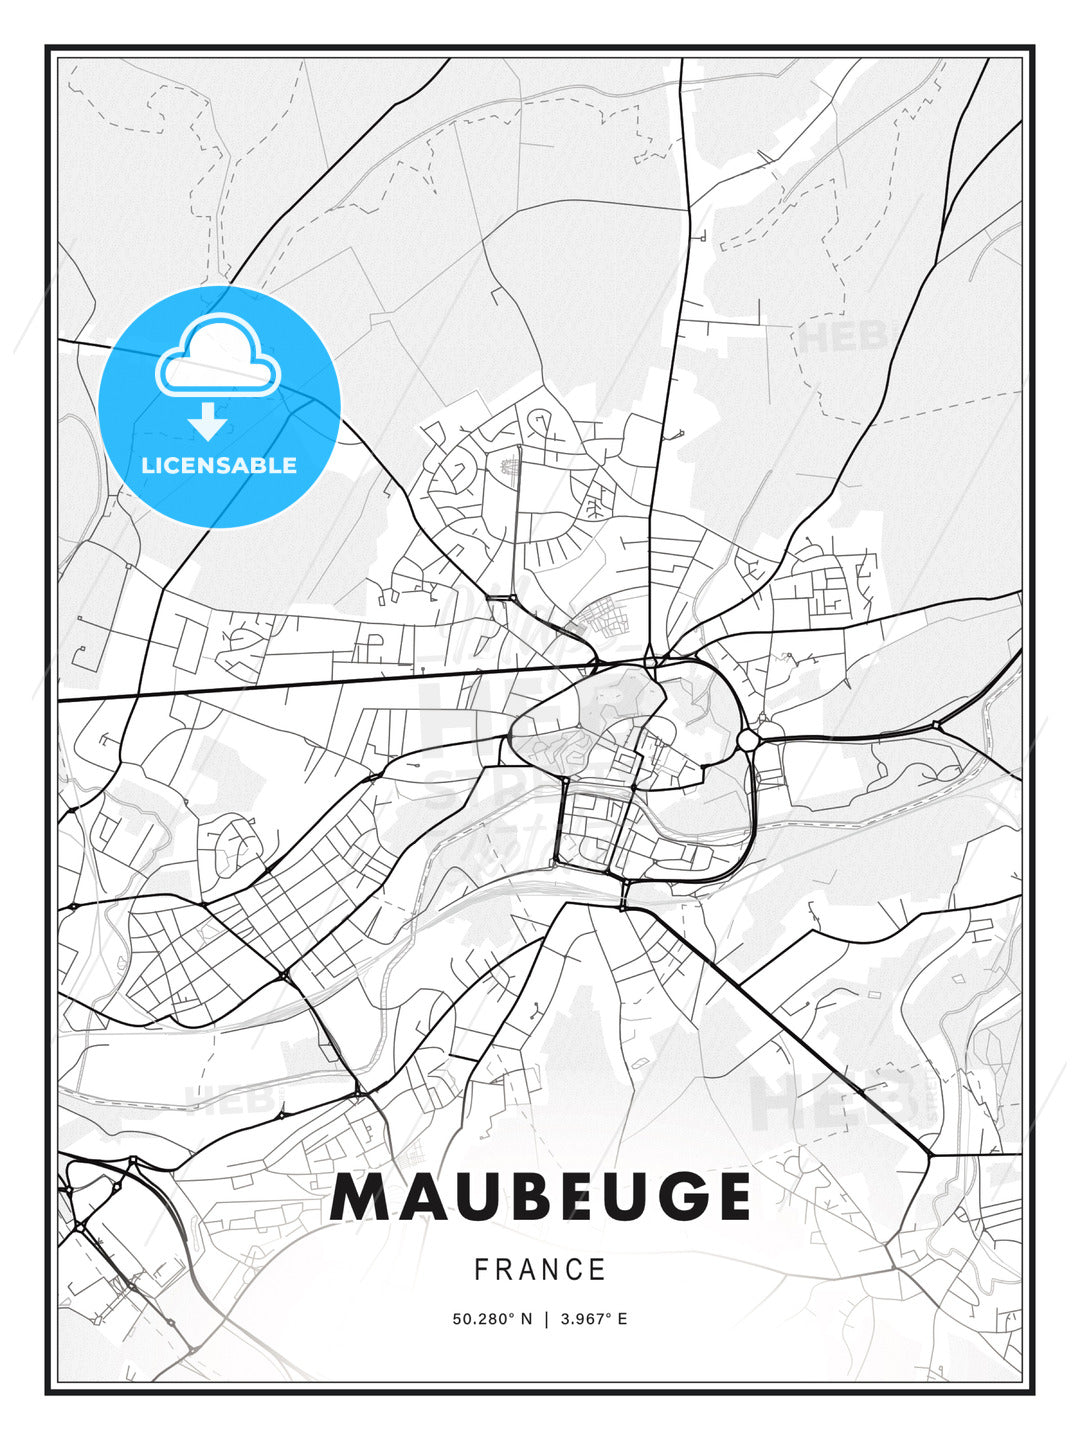 Maubeuge, France, Modern Print Template in Various Formats - HEBSTREITS Sketches